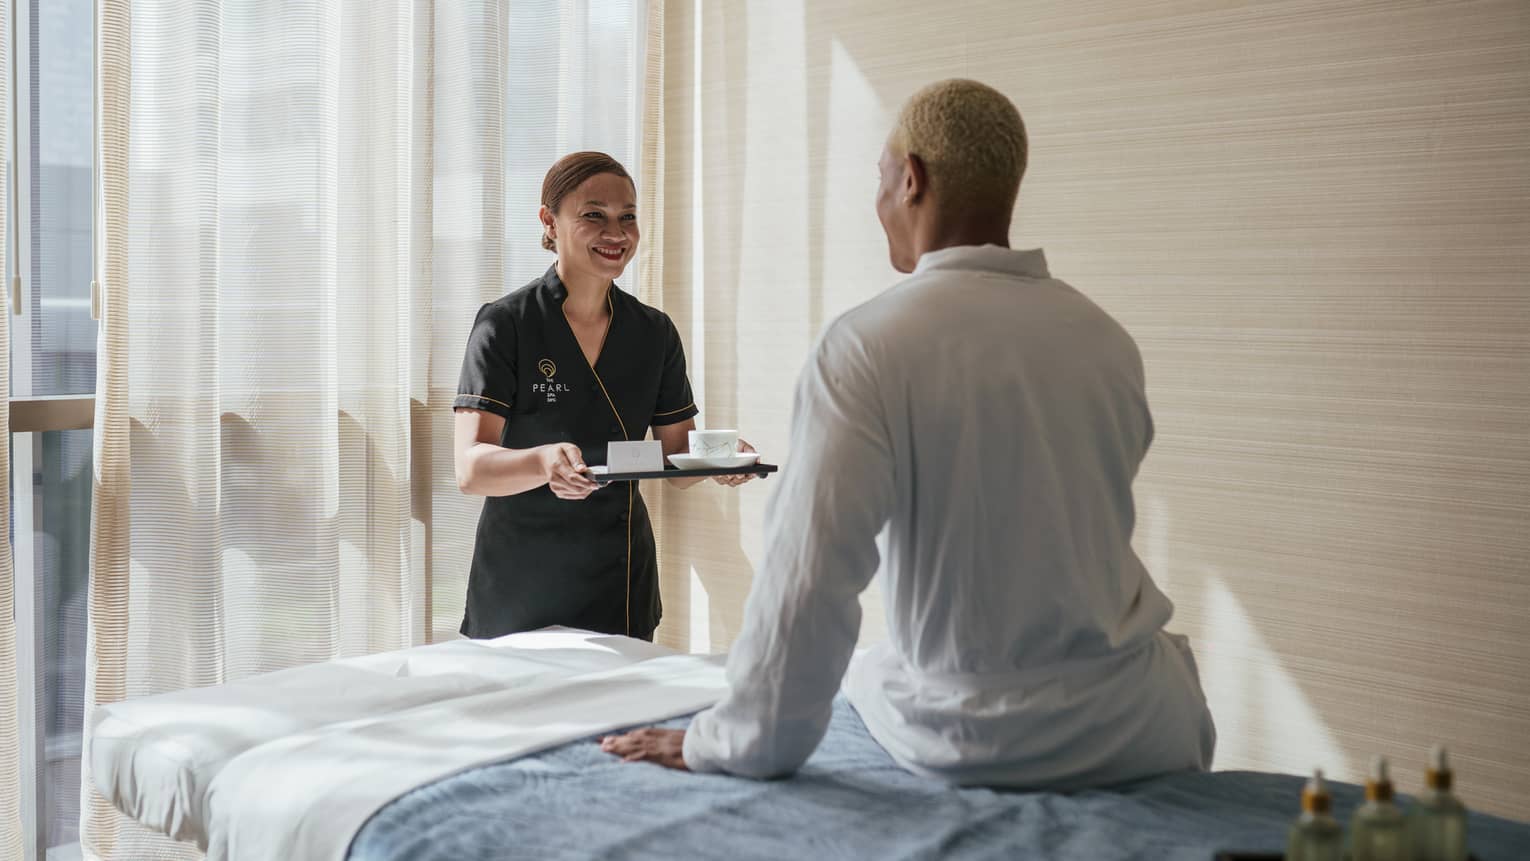 Spa attendant carrying a tea tray greets a man wearing a white spa robe who is sitting on a massage table